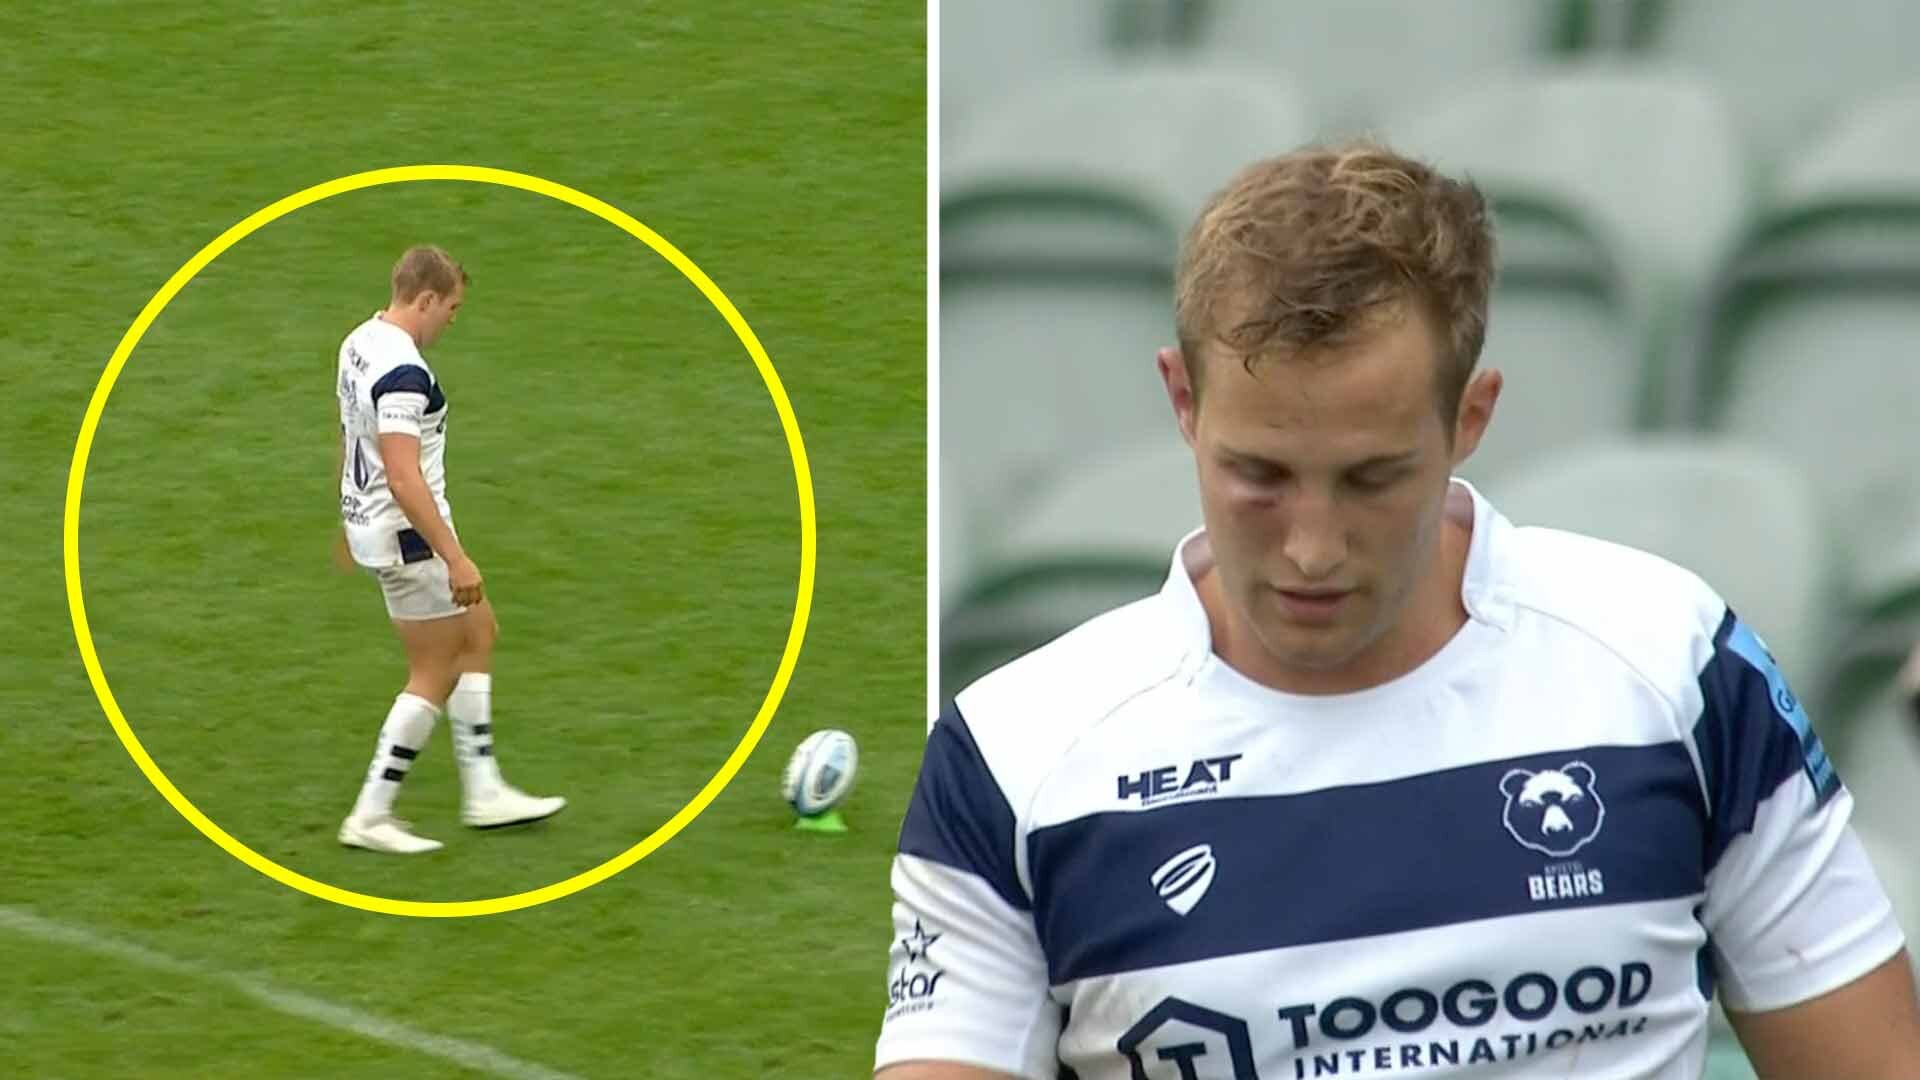 Bristol Bears player makes right idiot of himself as he goes over for easy try